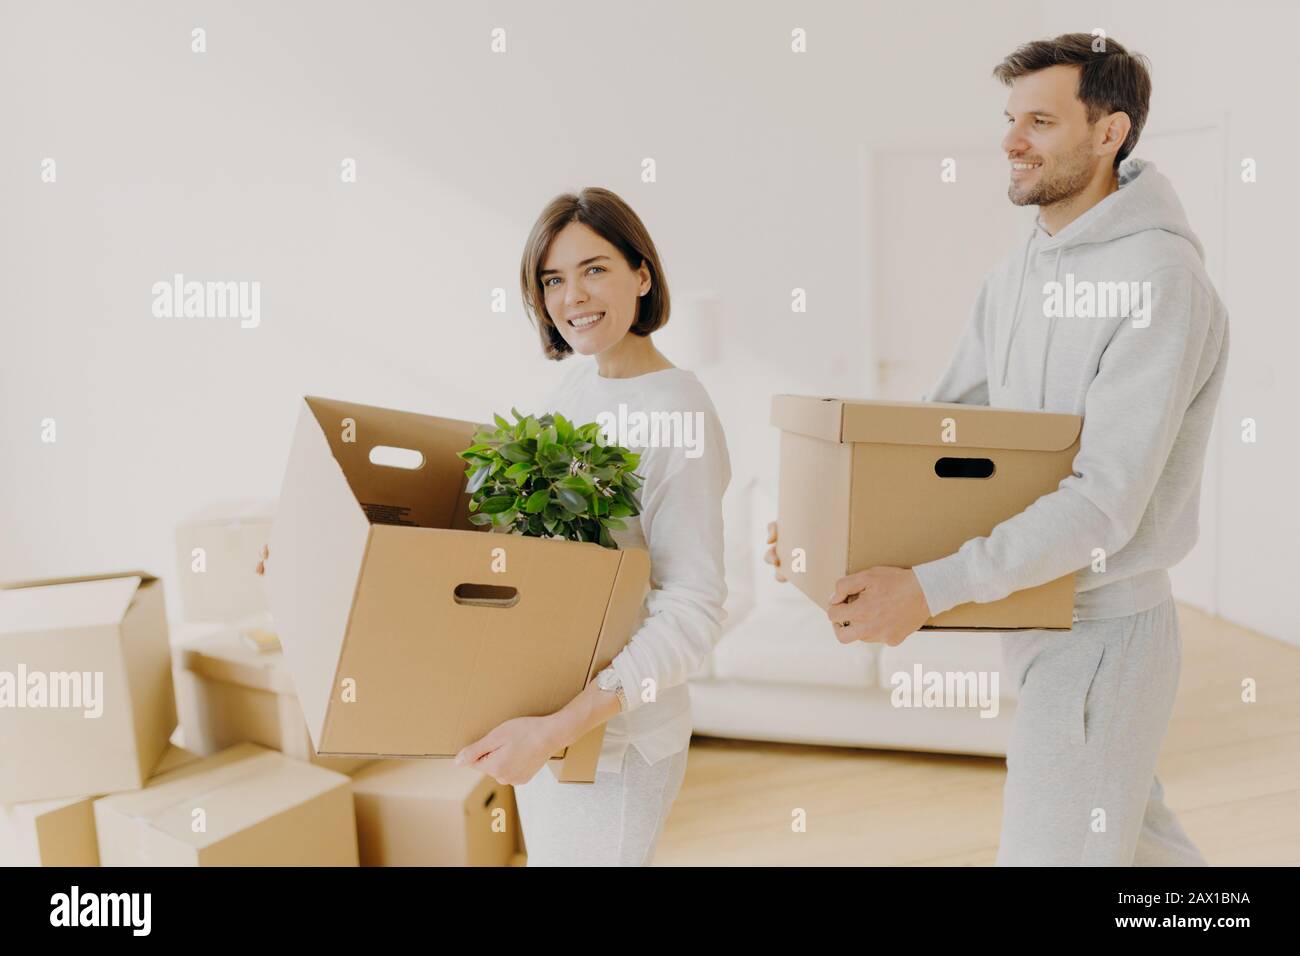 Photo of family couple carry big boxes with households items and personal belongings, move into new home, enter new bought or rented house. Happy home Stock Photo